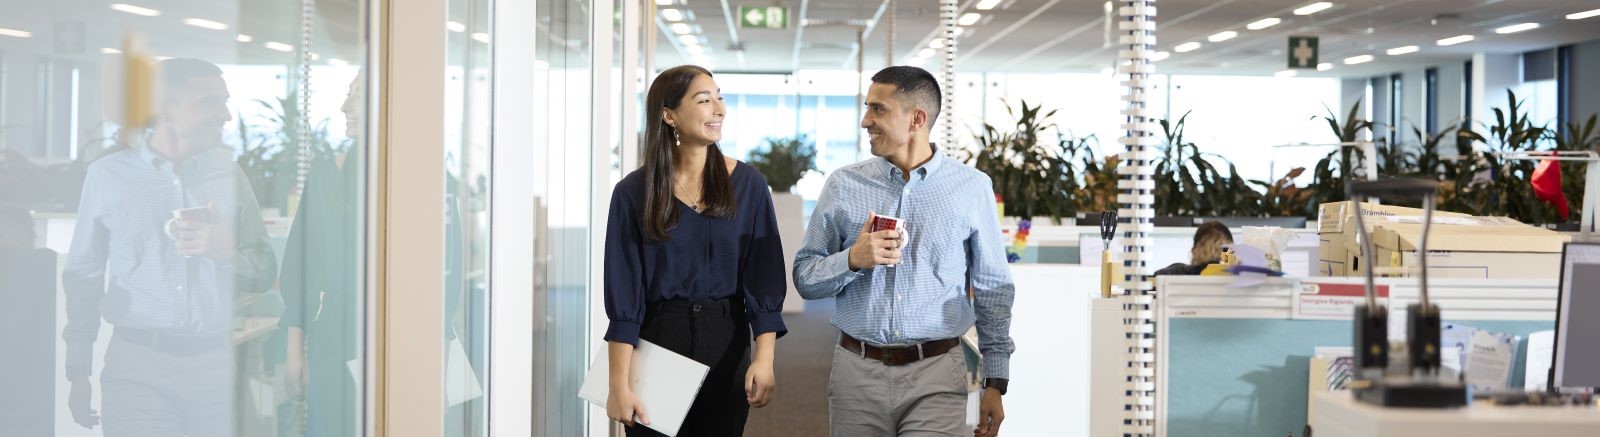 A woman and man walking in an office. They are smiling and looking at each other. The man is holding a coffee cup and the woman is holding a folder